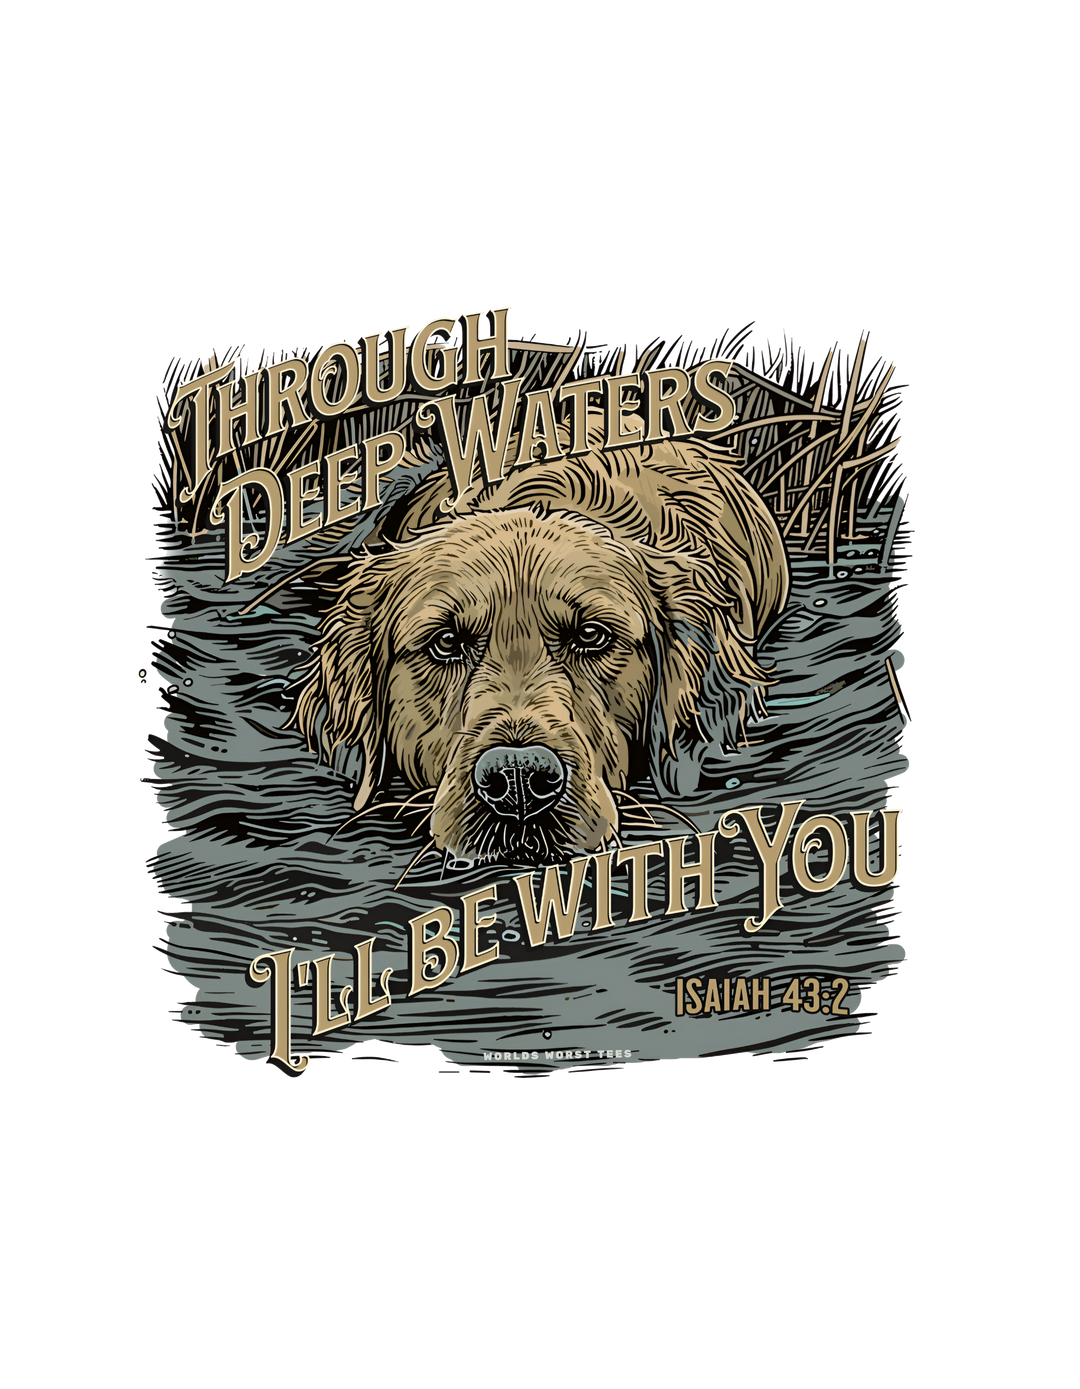 A heavy blend hooded sweatshirt featuring a dog in water design, ideal for relaxation. Made of 50% cotton and 50% polyester, with a kangaroo pocket and drawstring hood. From Worlds Worst Tees.